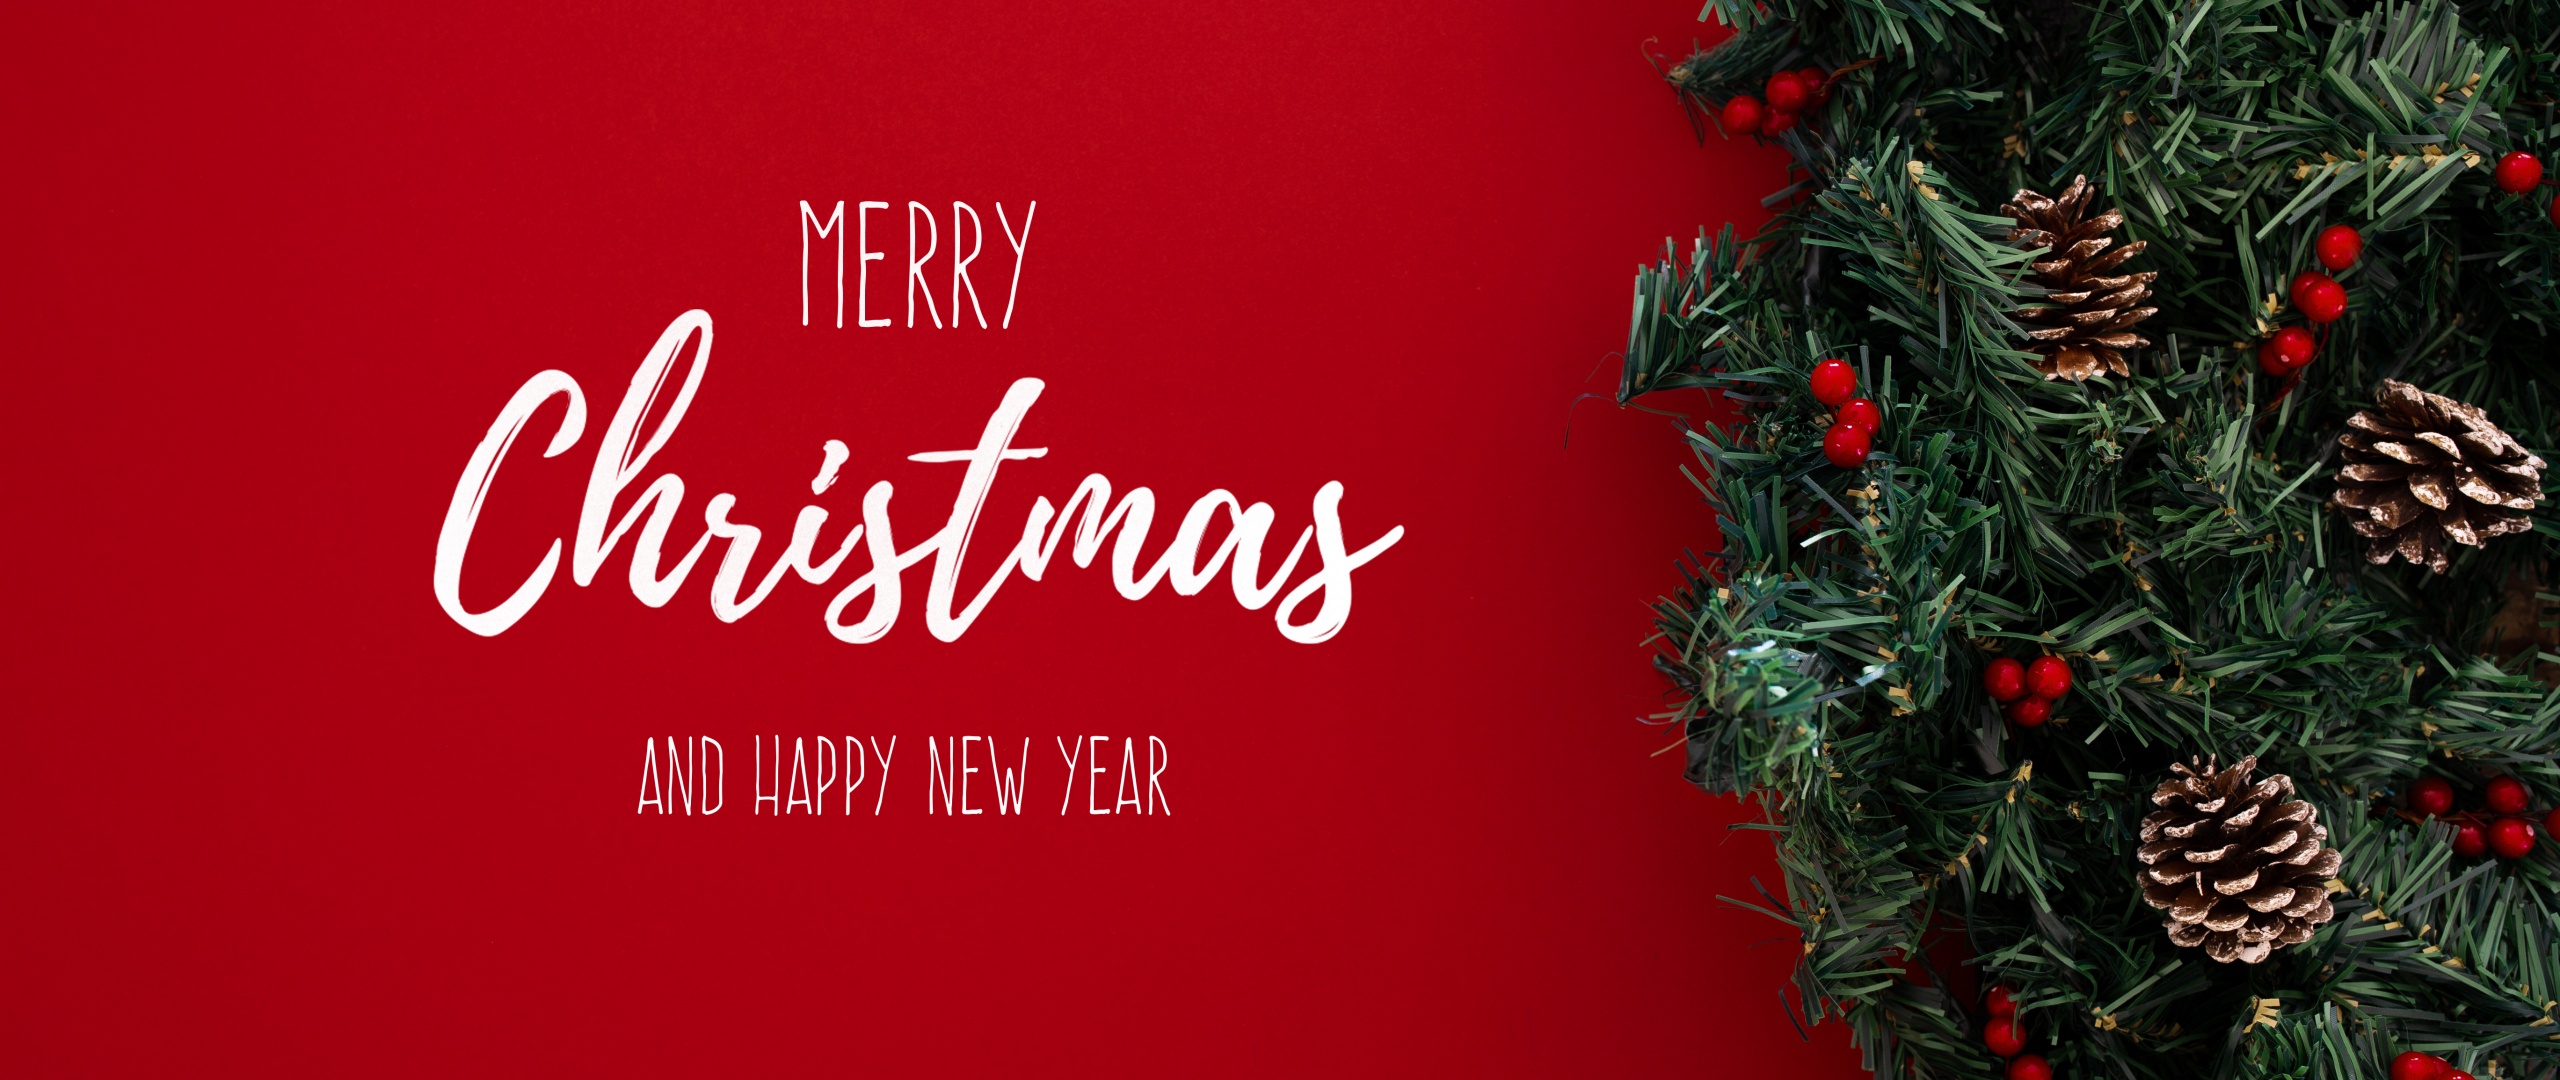 Happy New Year Wallpaper 4K, Merry Christmas, Red background, Celebrations/ Christmas